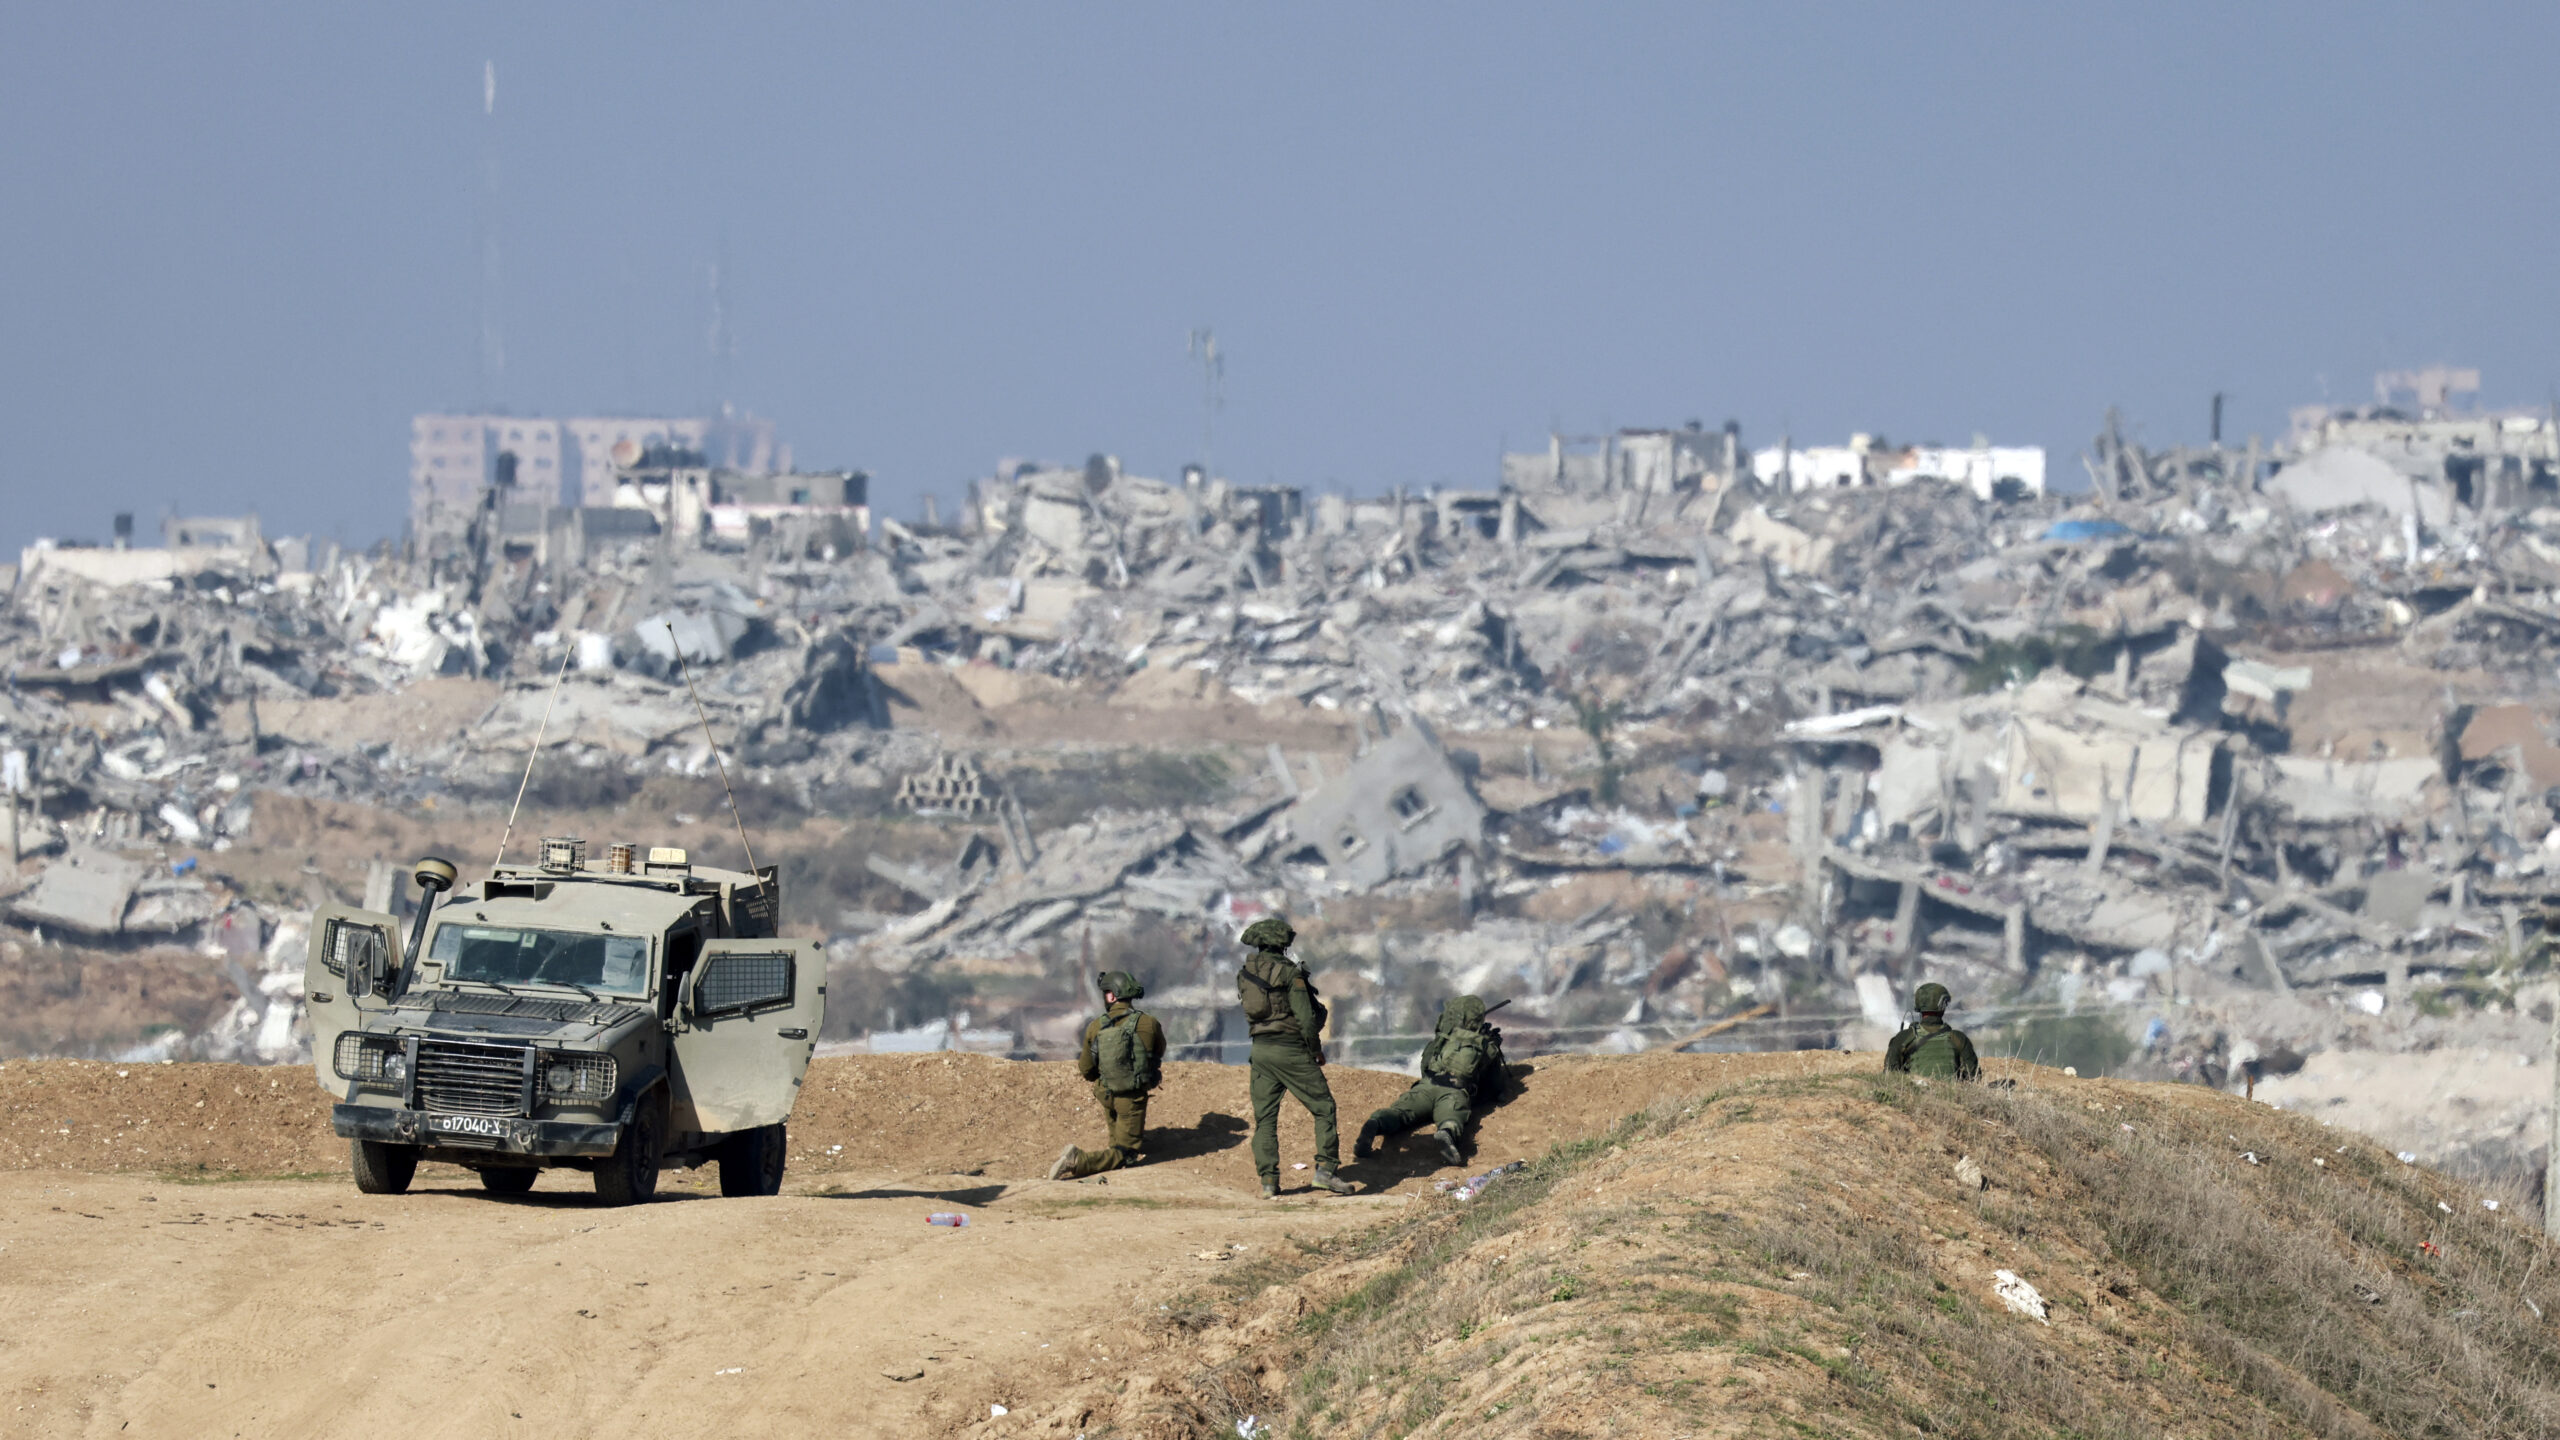 Israeli troops have withdrawn from some parts of Gaza City, a city official says